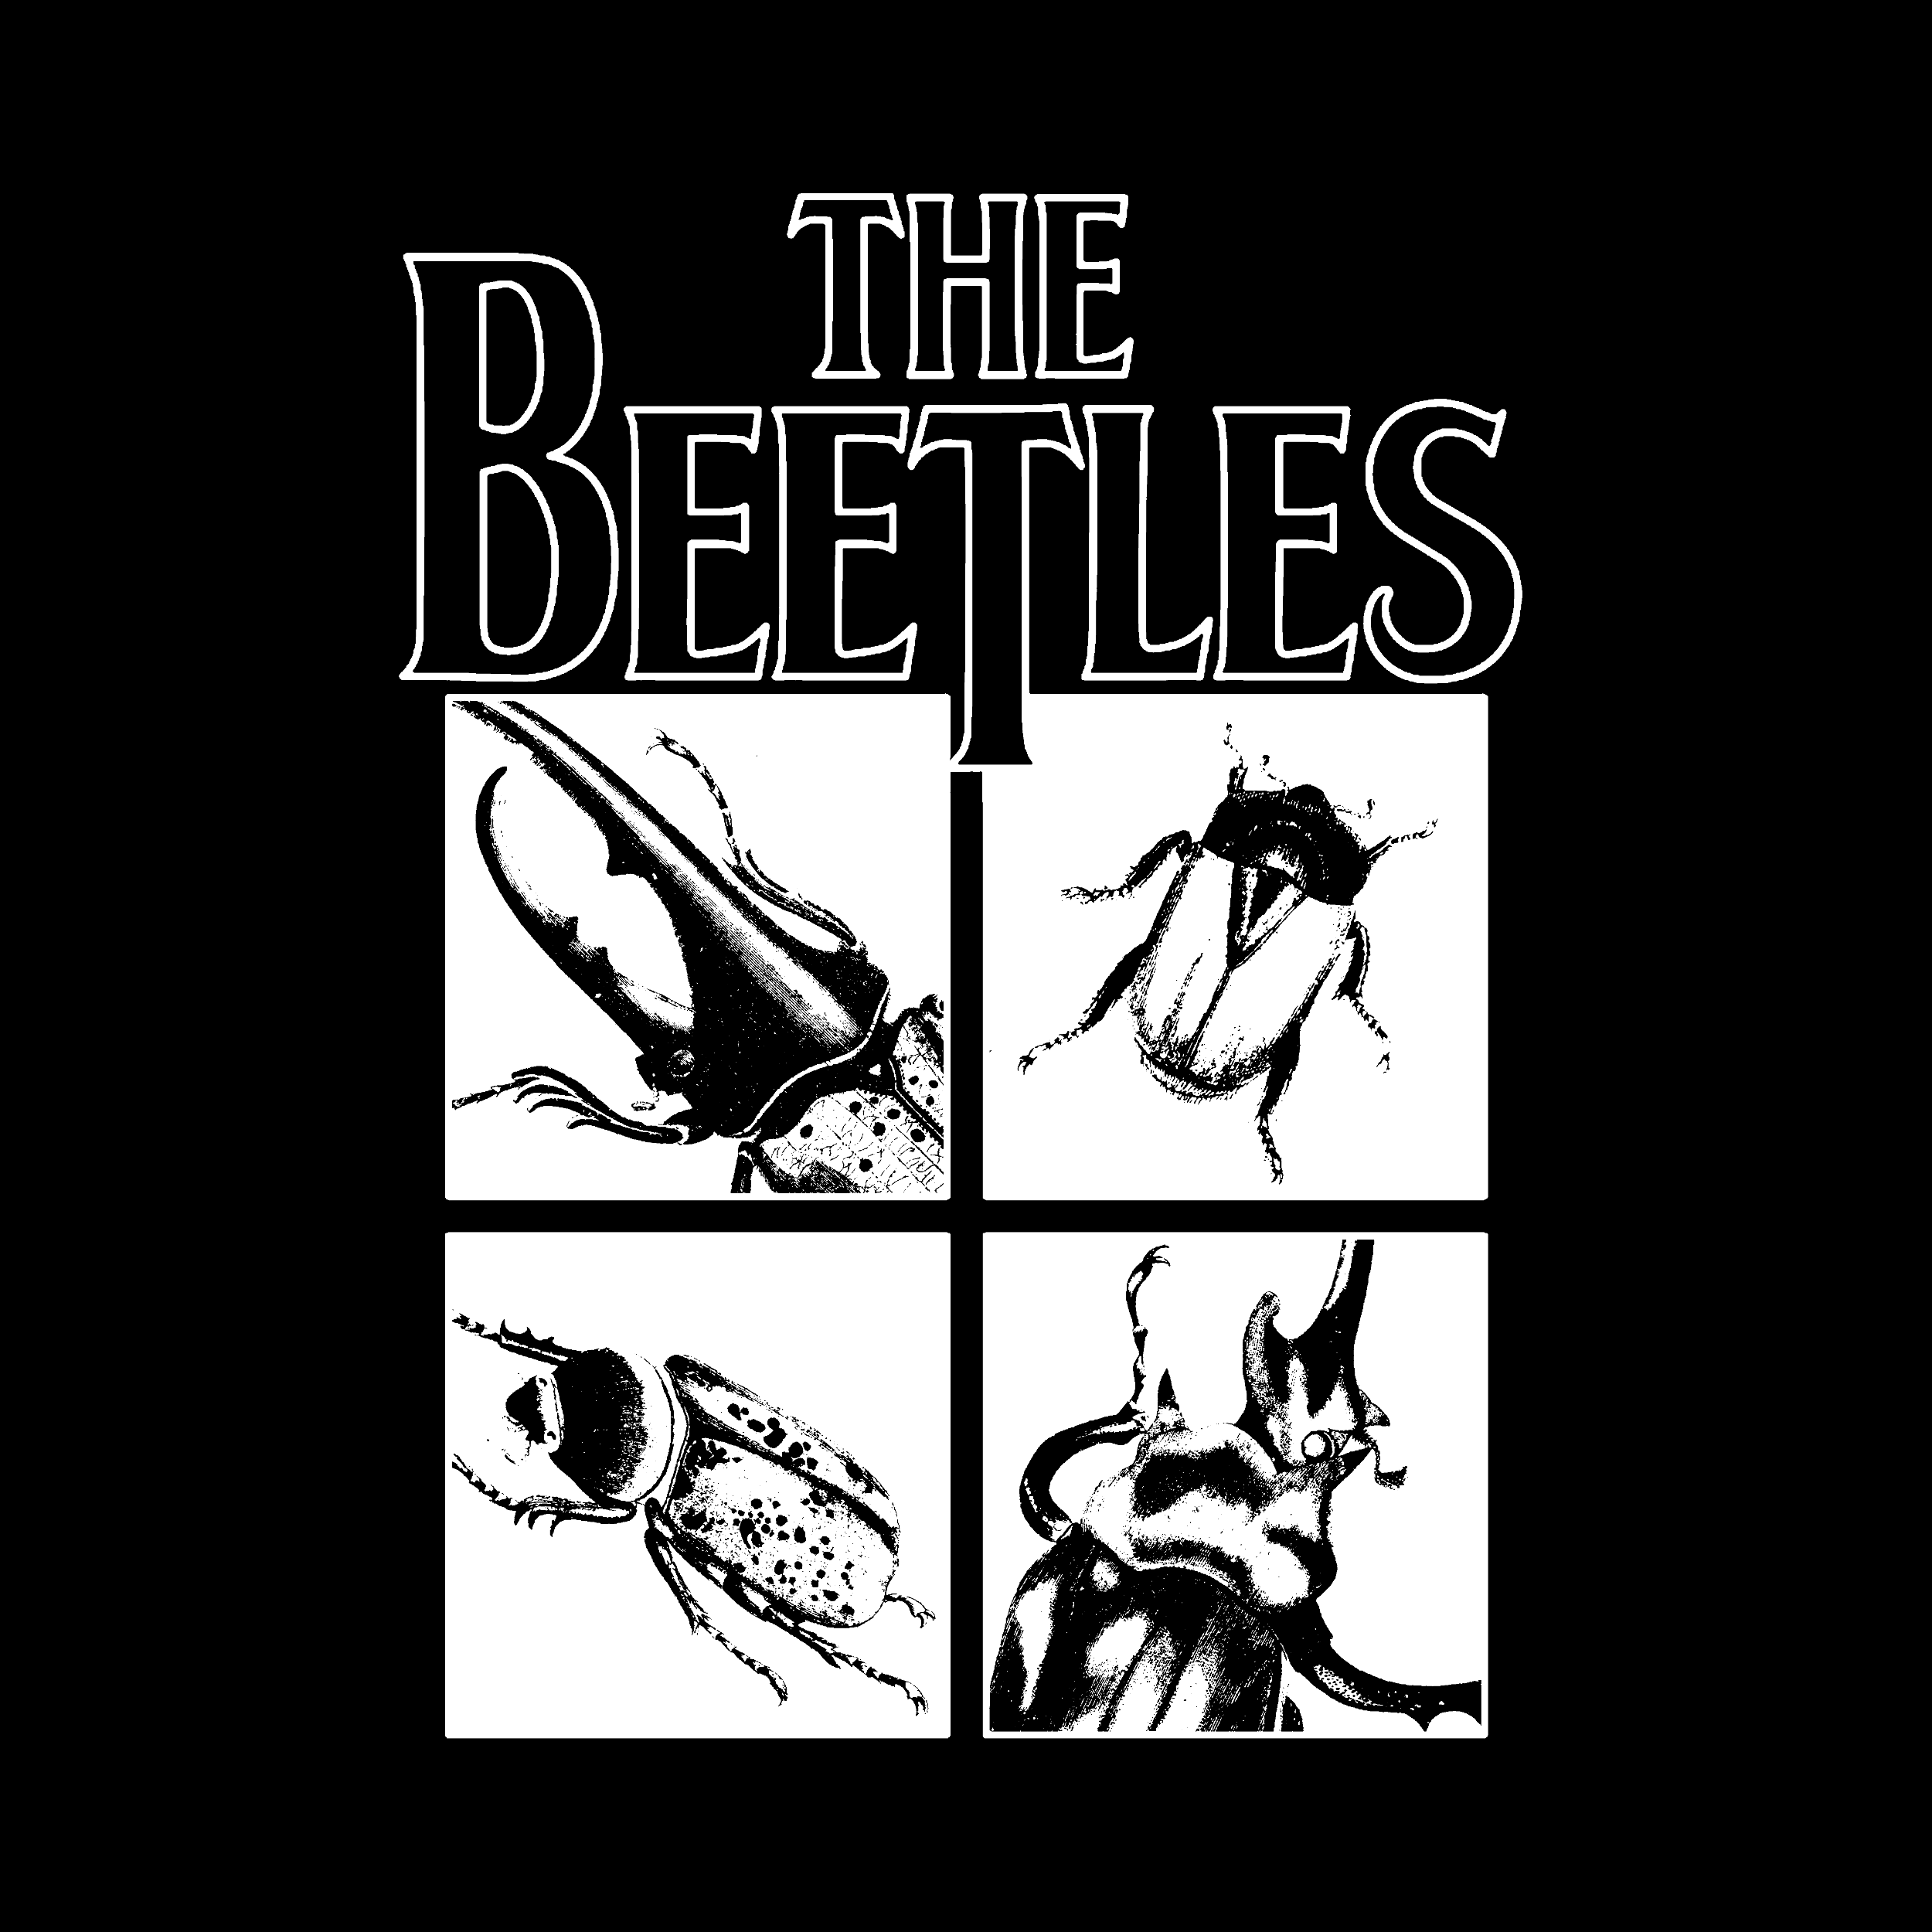 The Beetles Insect Band Premium Tee